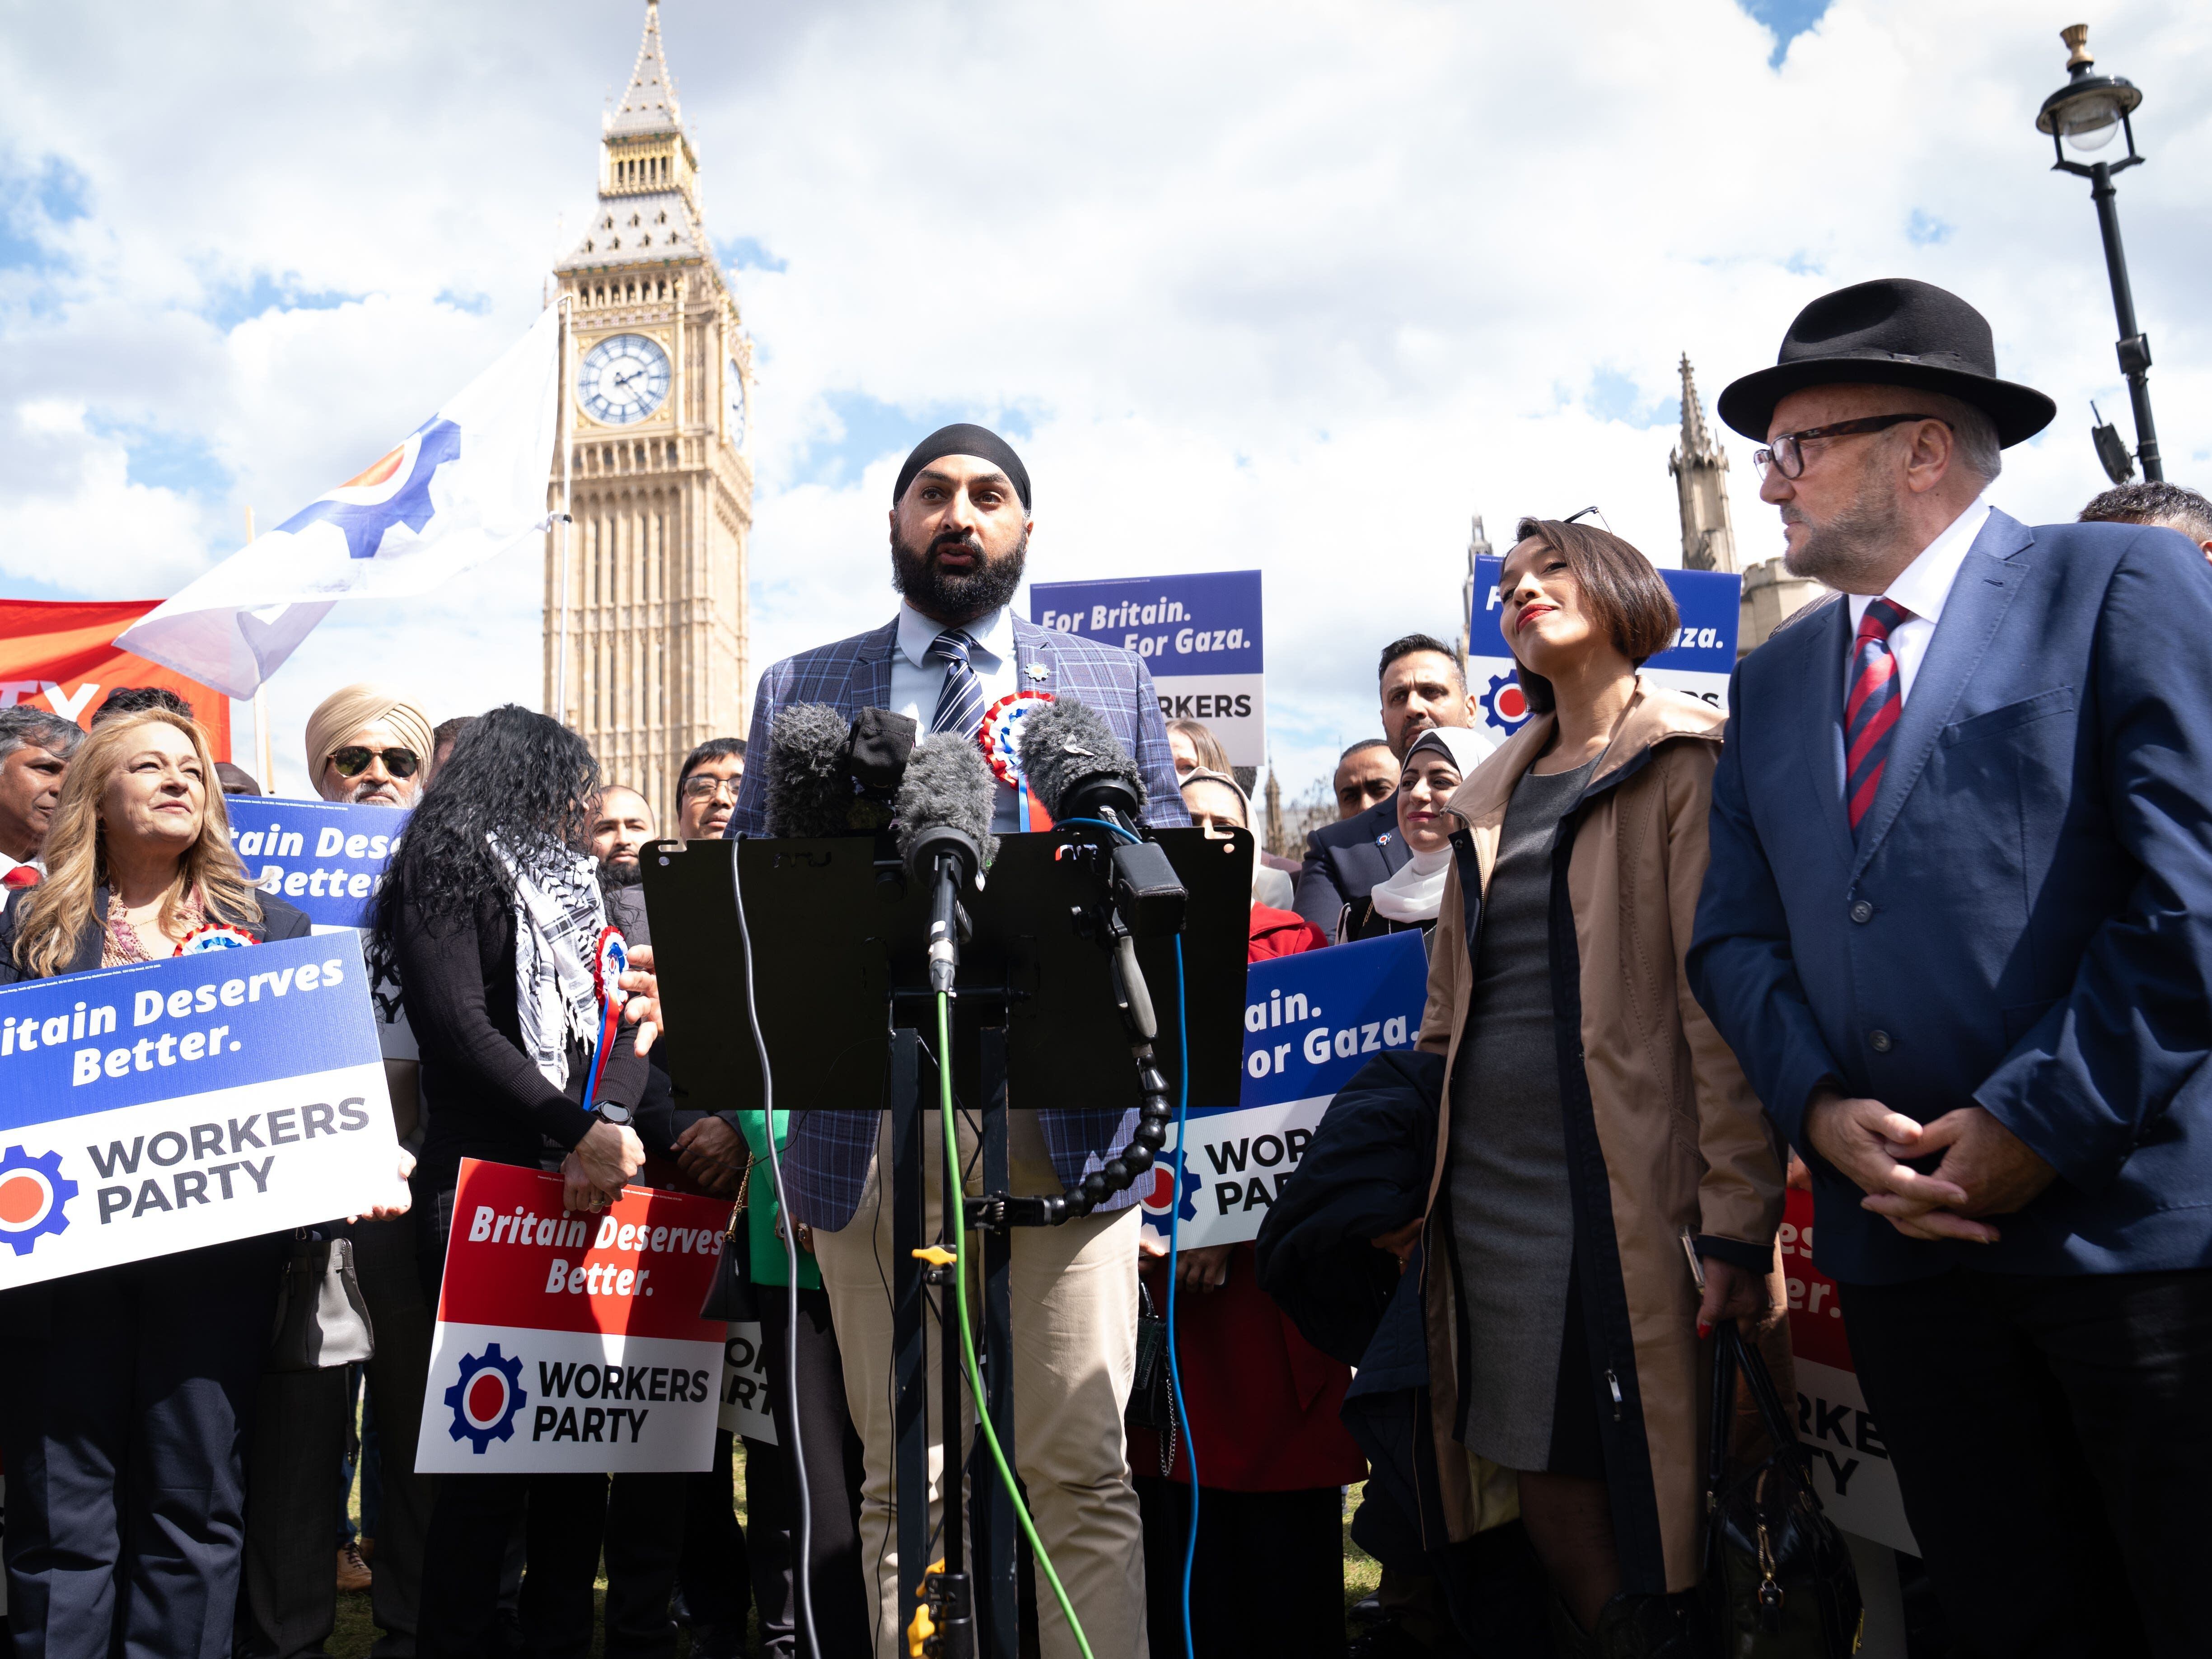 Ex-England cricketer Monty Panesar to stand as MP for George Galloway’s party